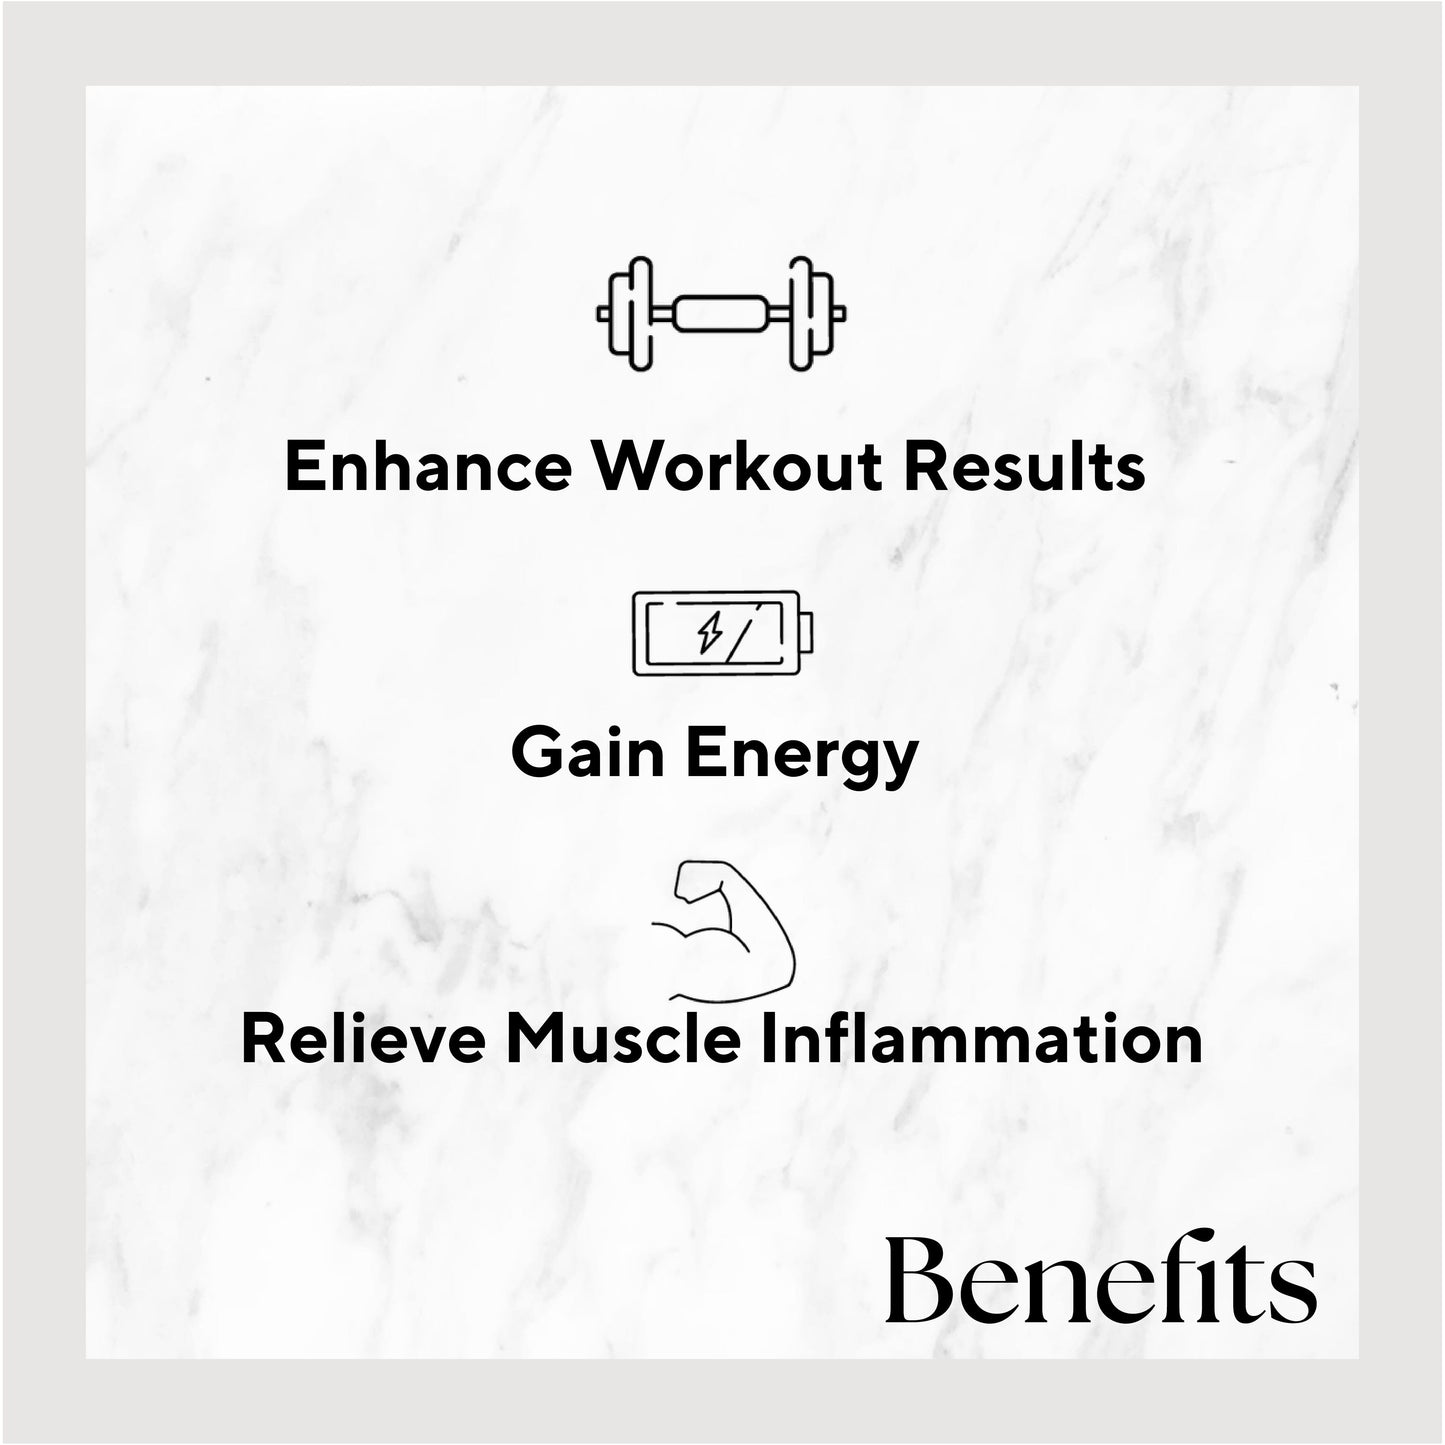 enhance workout results, gain energy, relieve muscle inflammation